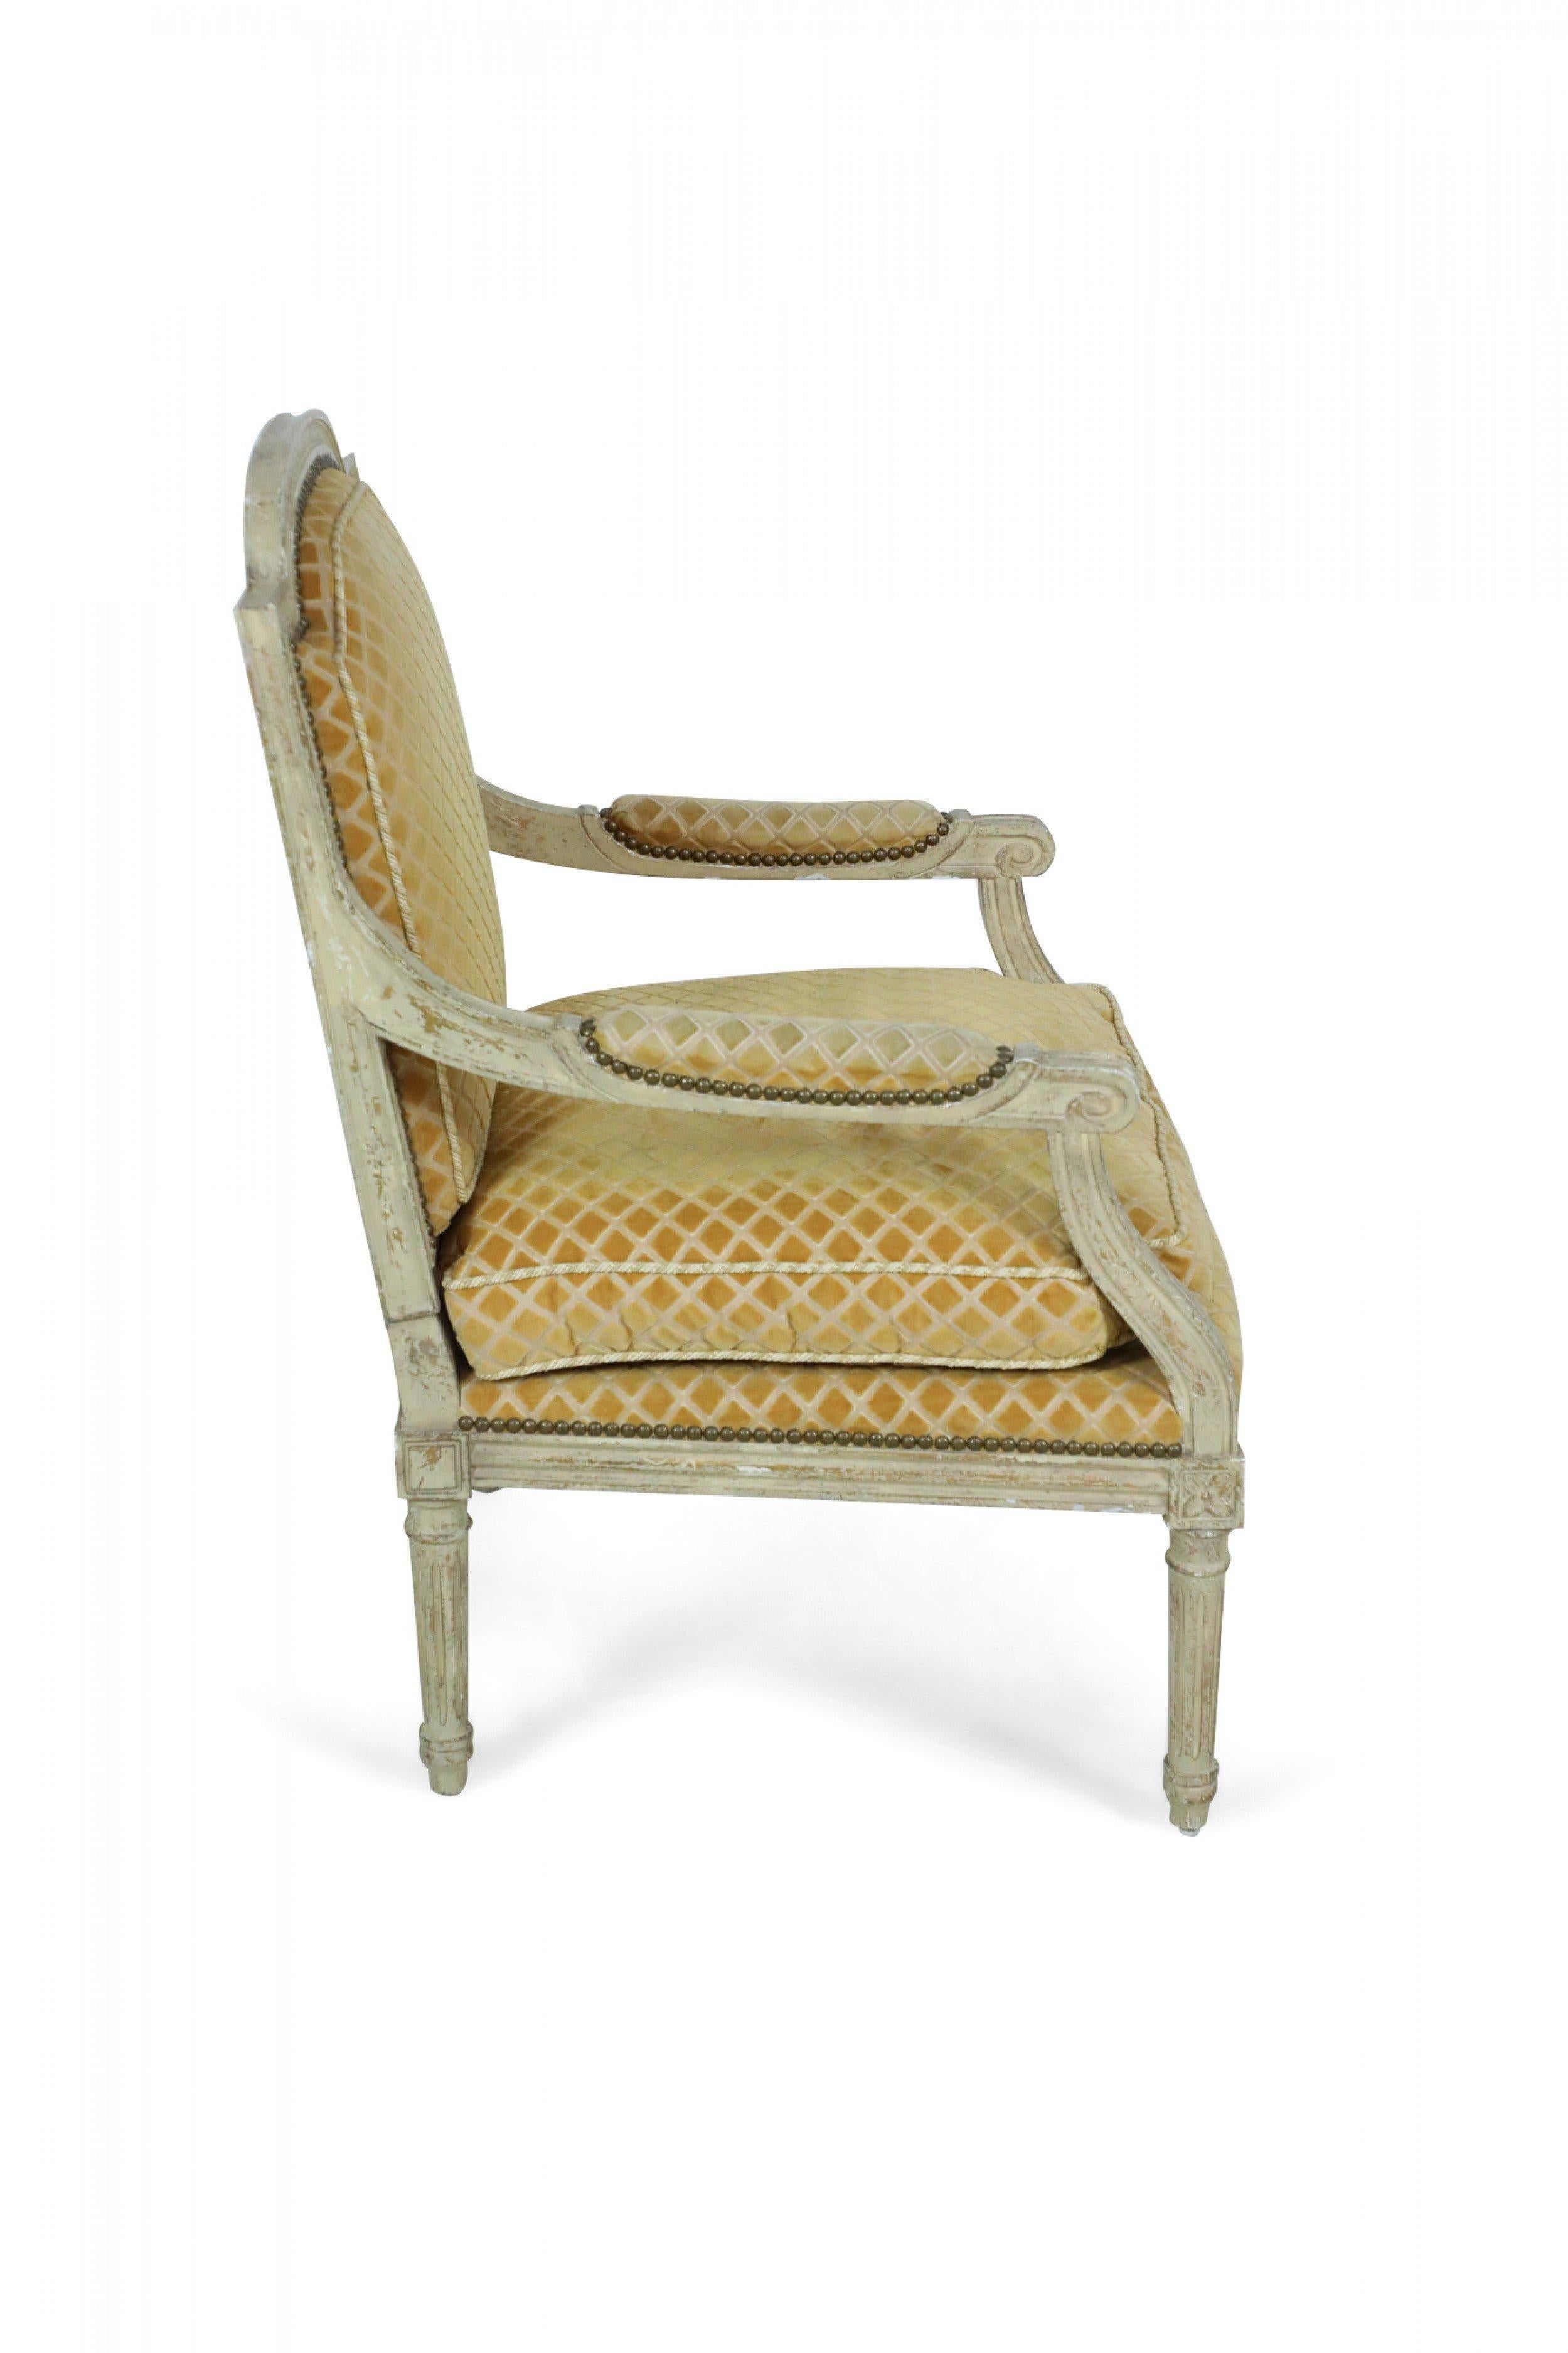 Pair of Louis XVI-Style Gold Upholstered Fauteuils / Armchairs For Sale 7